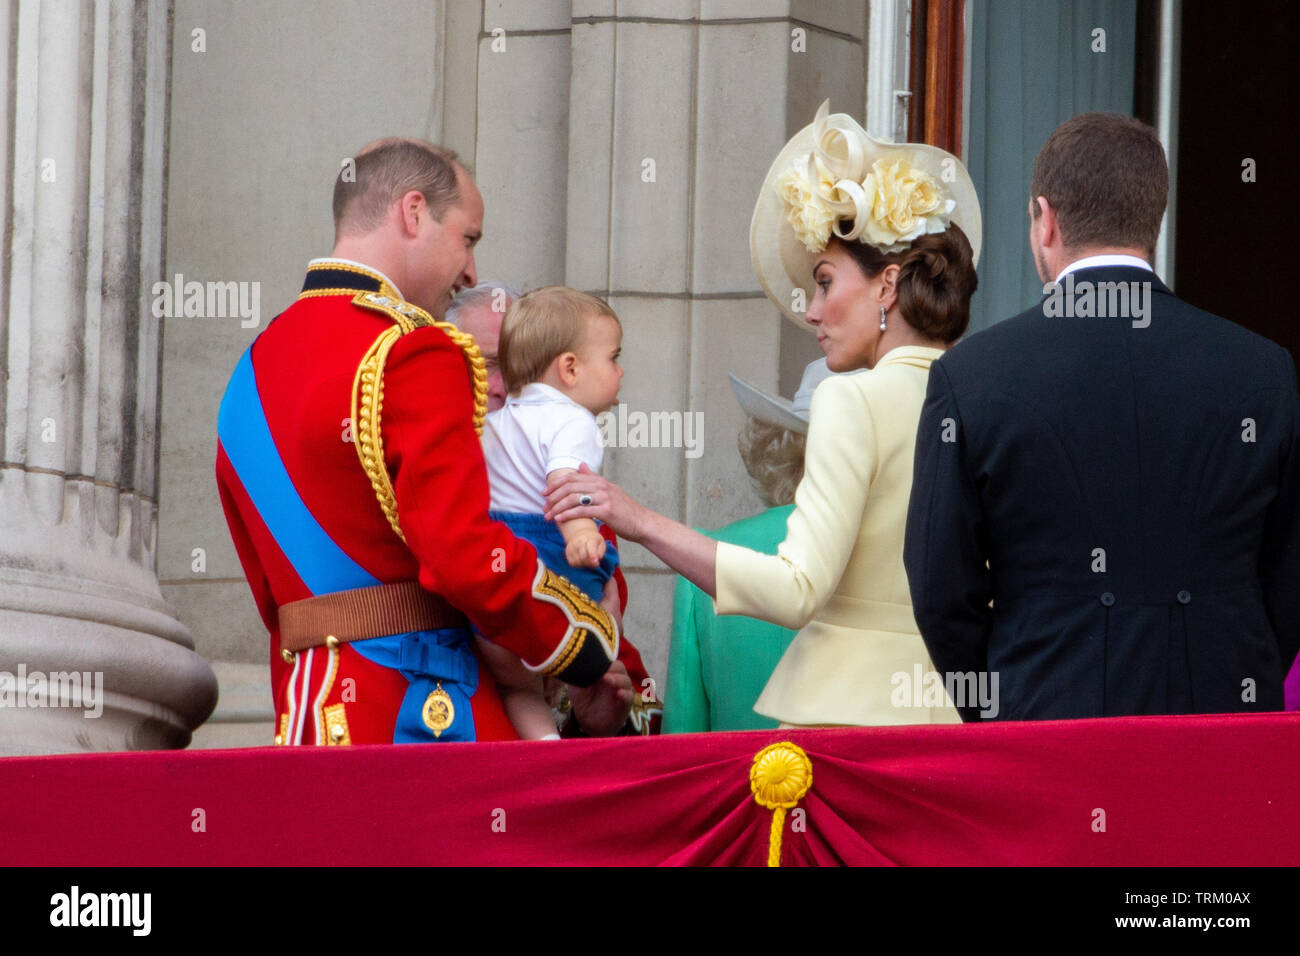 Picture dated June 8th shows Prince William, Catherine Duchess of Cambridge, Prince Louis,  at the Trooping the Colour in London today.   The Queen's official birthday has been marked with the annual Trooping the Colour parade. She was joined by members of her family and thousands of spectators to watch the display in Horse Guards Parade in Whitehall. The Prince of Wales, the Duchess of Cornwall, the Duke and Duchess of Cambridge and the Duke and Duchess of Sussex all attended. The Queen celebrated her 93rd birthday in April. The royal colonels - the Prince of Wales, colonel of the Welsh Guard Stock Photo